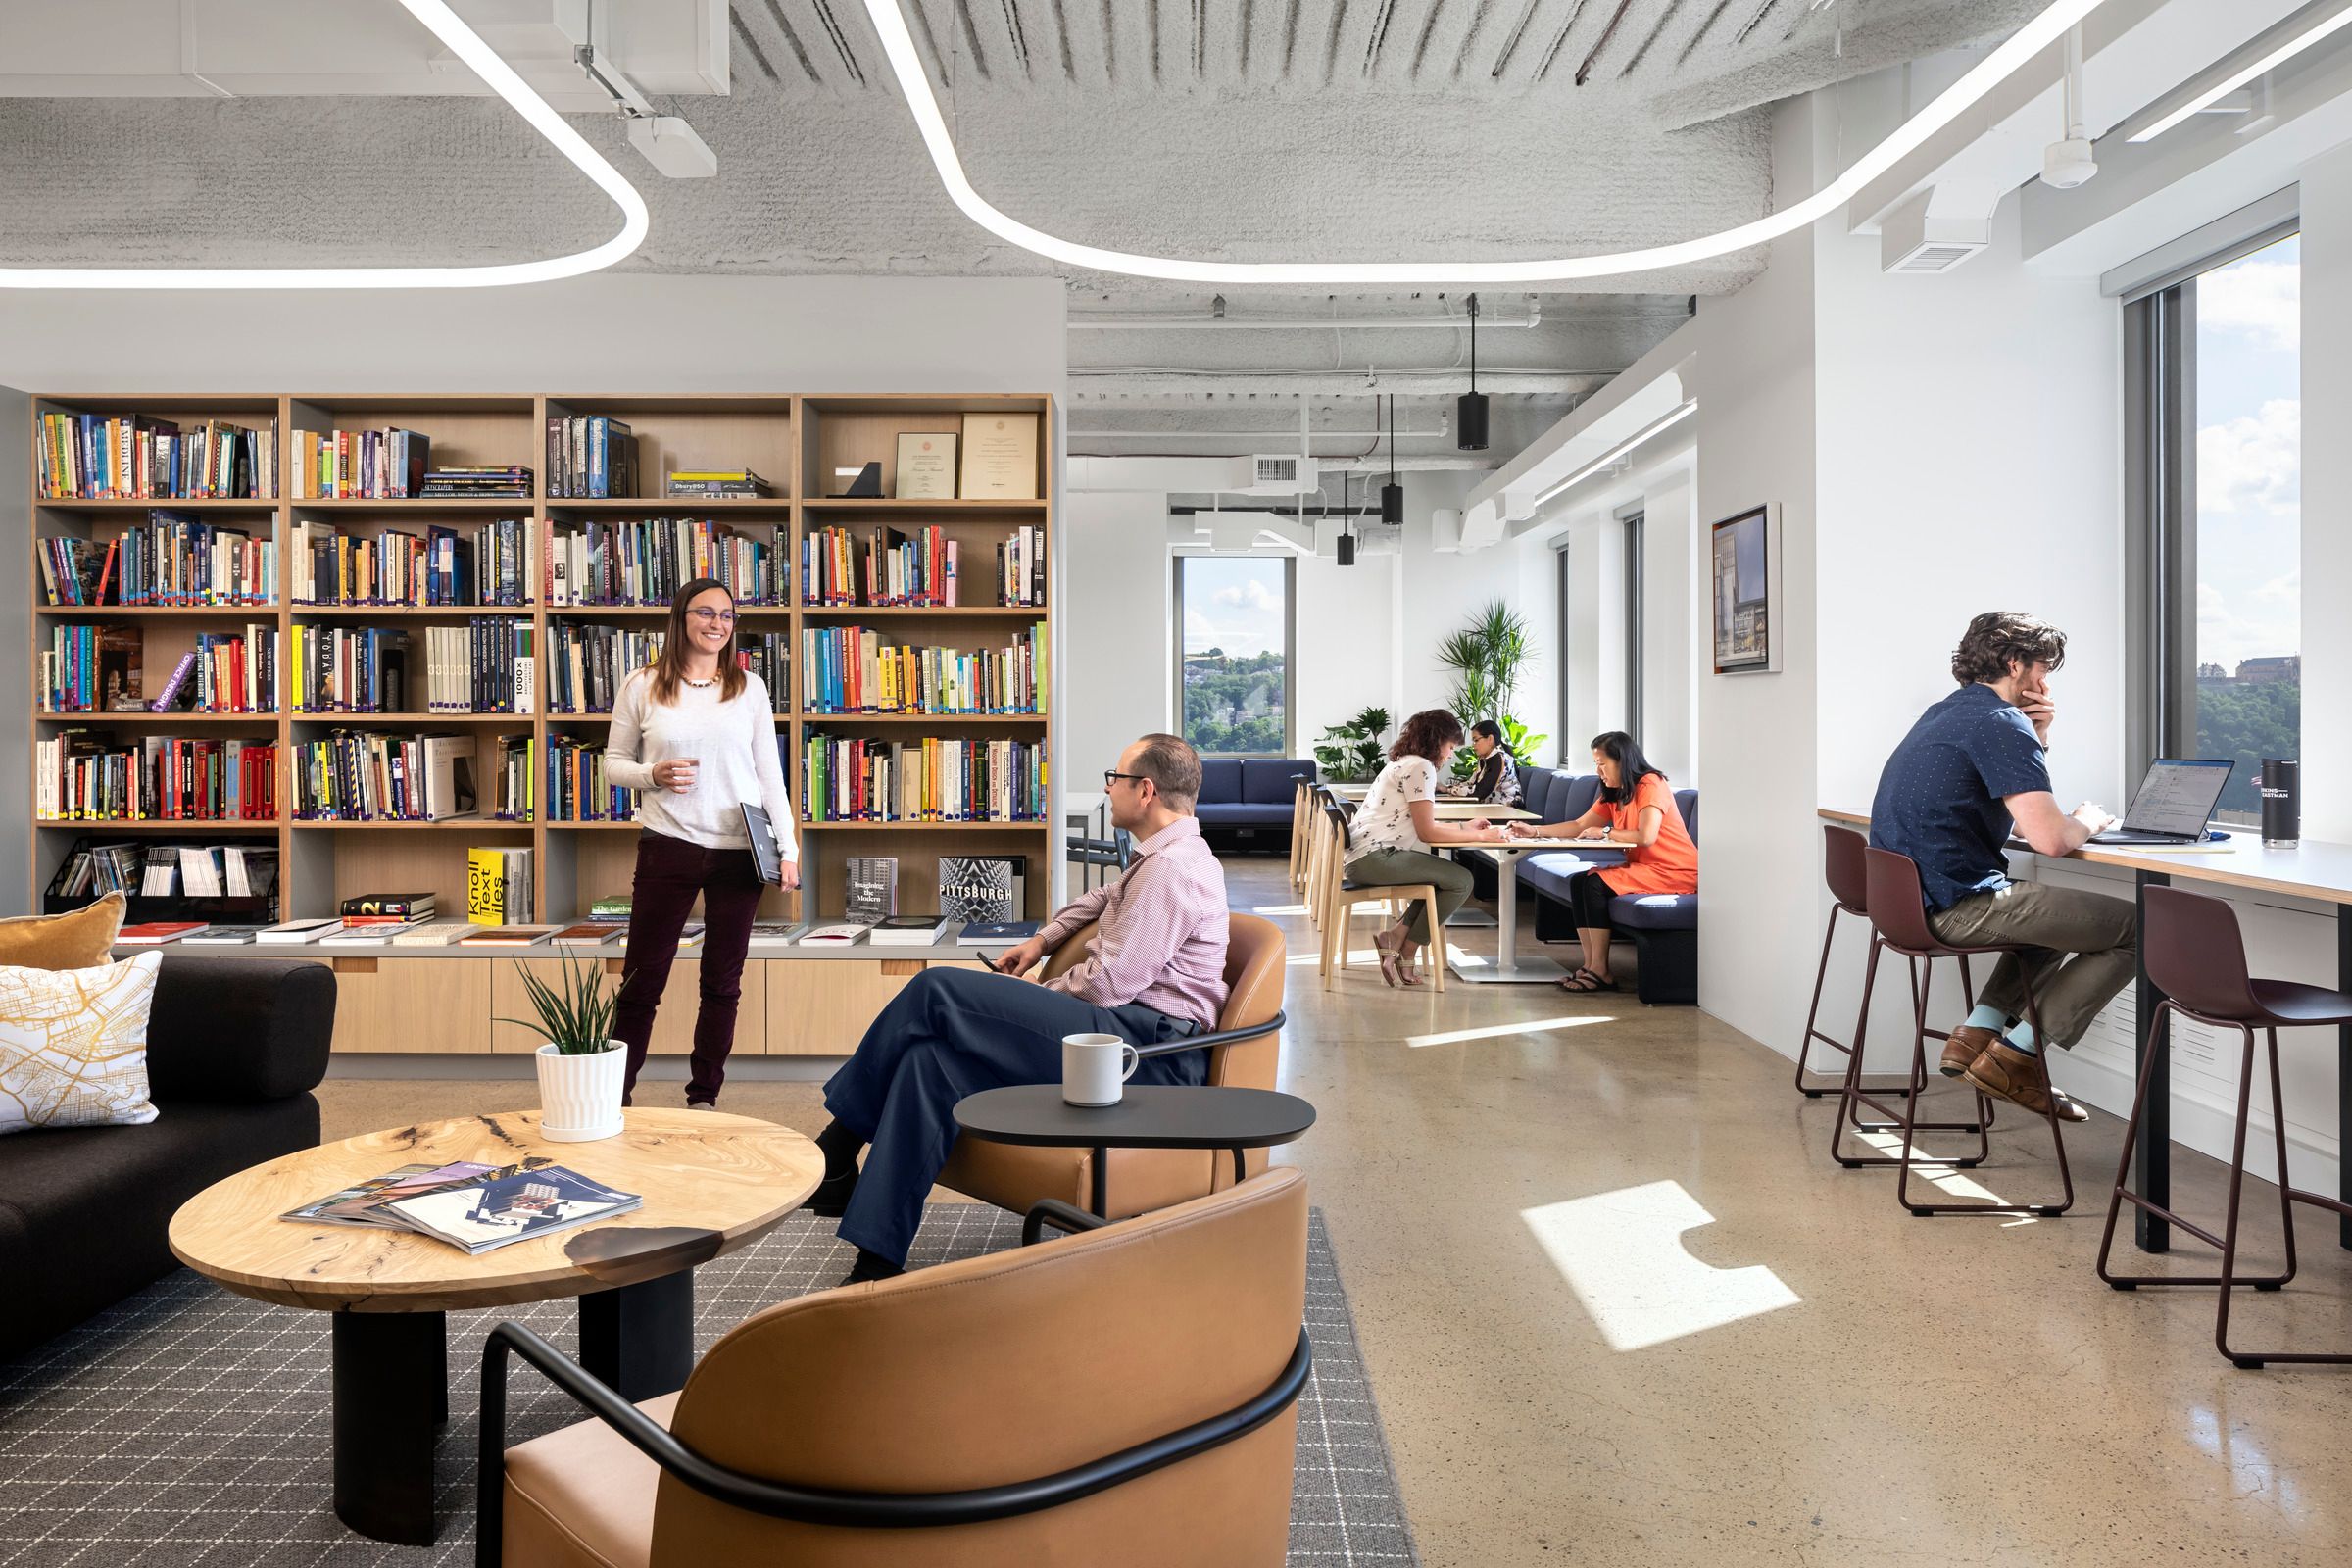 By mixing a variety of furniture and floor plans, Perkins Eastman has created workspaces that might recall a living room, a kitchen counter, or even a neighborhood cafe. (Andrew Rugge / Courtesy Perkins Eastman)